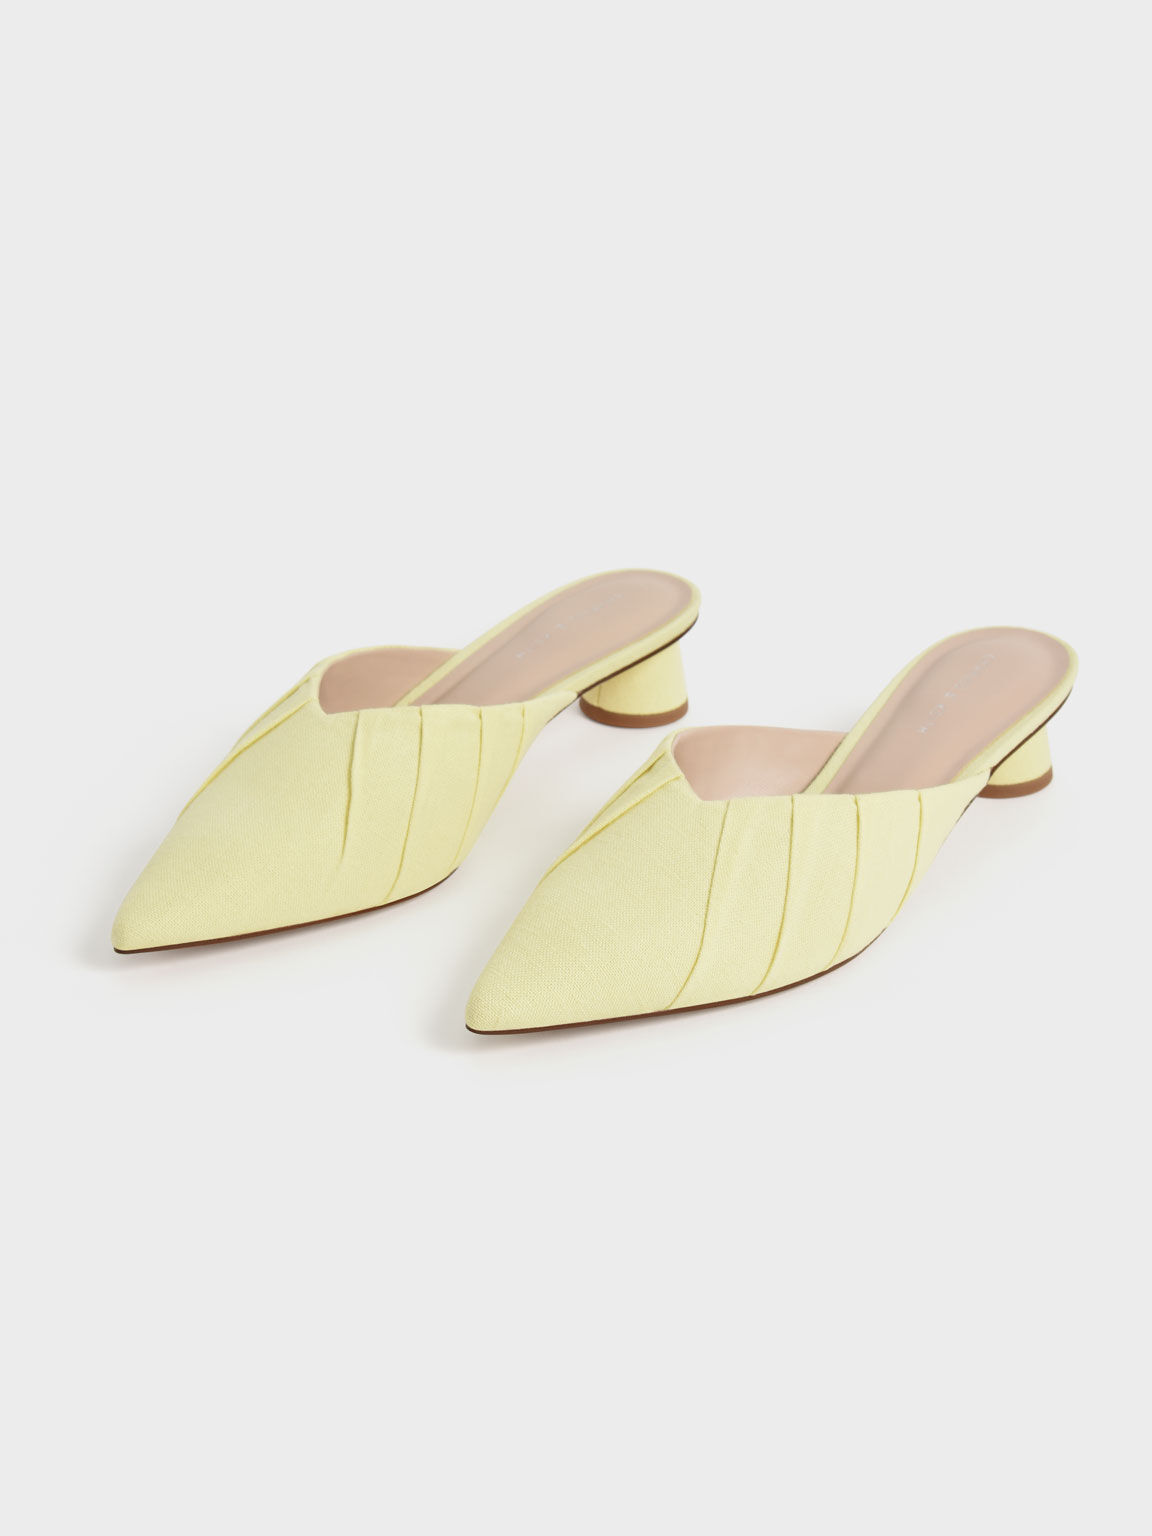 Linen Ruched Cylindrical Heel Mules, Yellow, hi-res